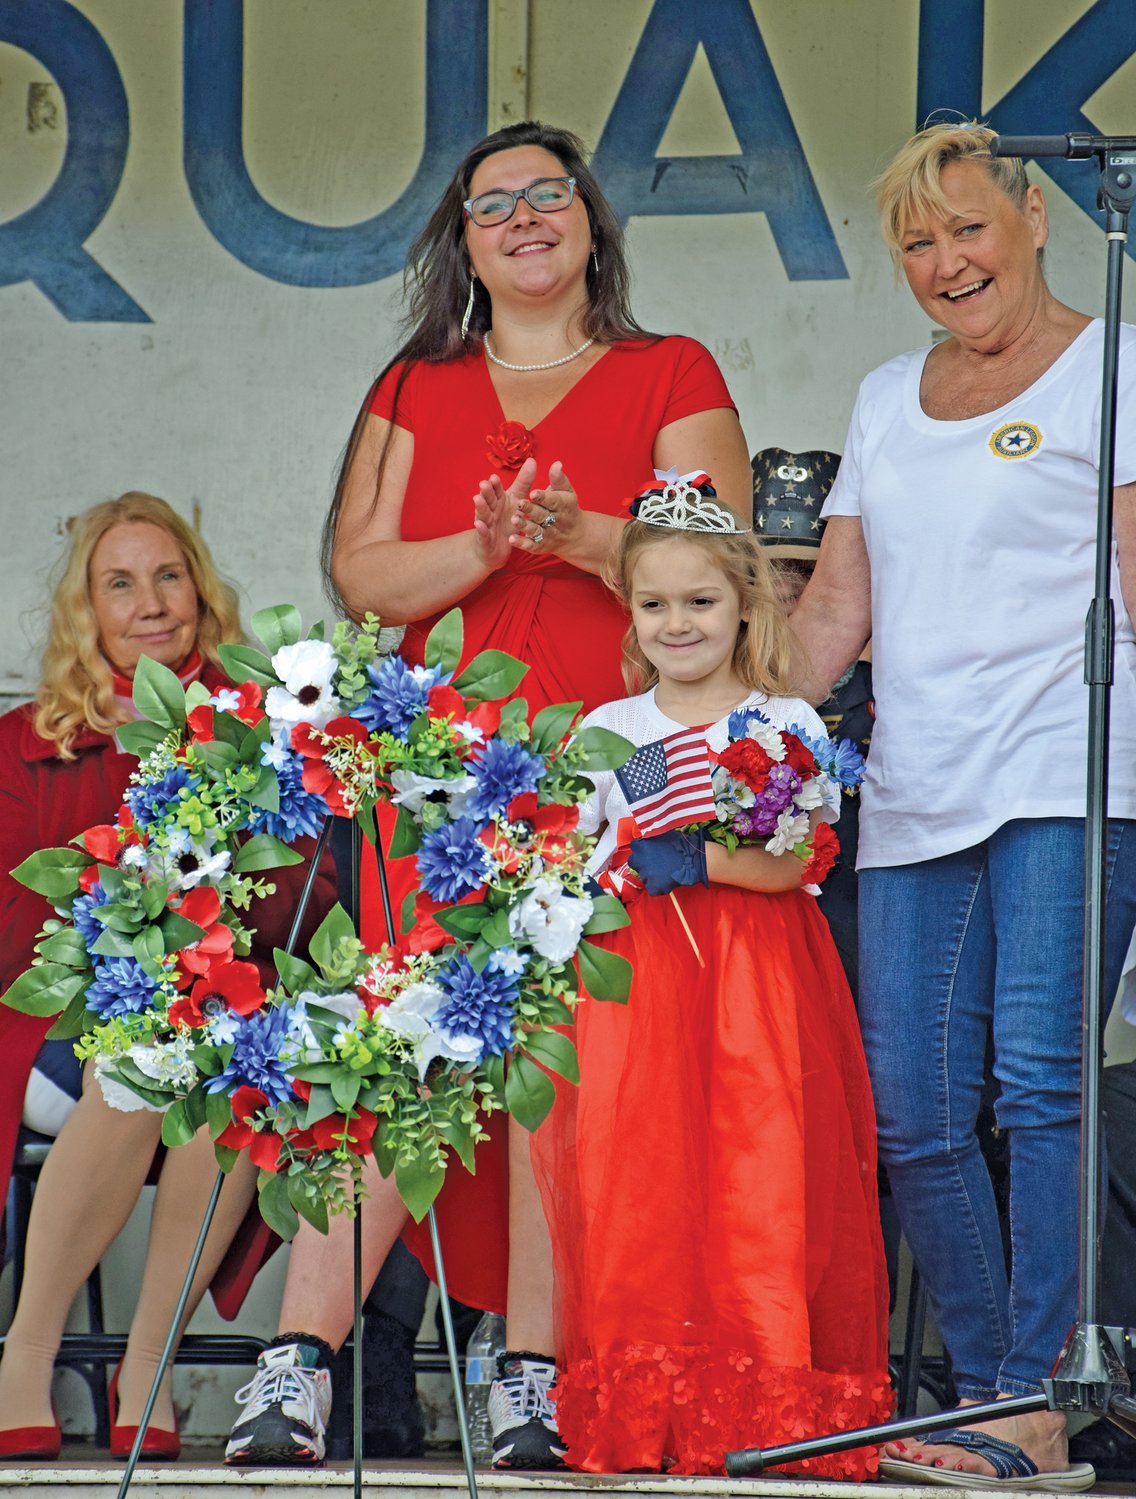 Breanna Yosmamaovich and Robin Goodwin of American Legion Post 242 Auxiliary present the Poppy Queen of 2021, 5-year-old Avery Palmer. The poppy has been a symbol for the American Legion since World War I, when Canadian physician Lt. Col. John McCrae, spotted red poppies among the graves after a friend was killed in a frontline battle. McCrae wrote the poem “In Flanders Fields.”